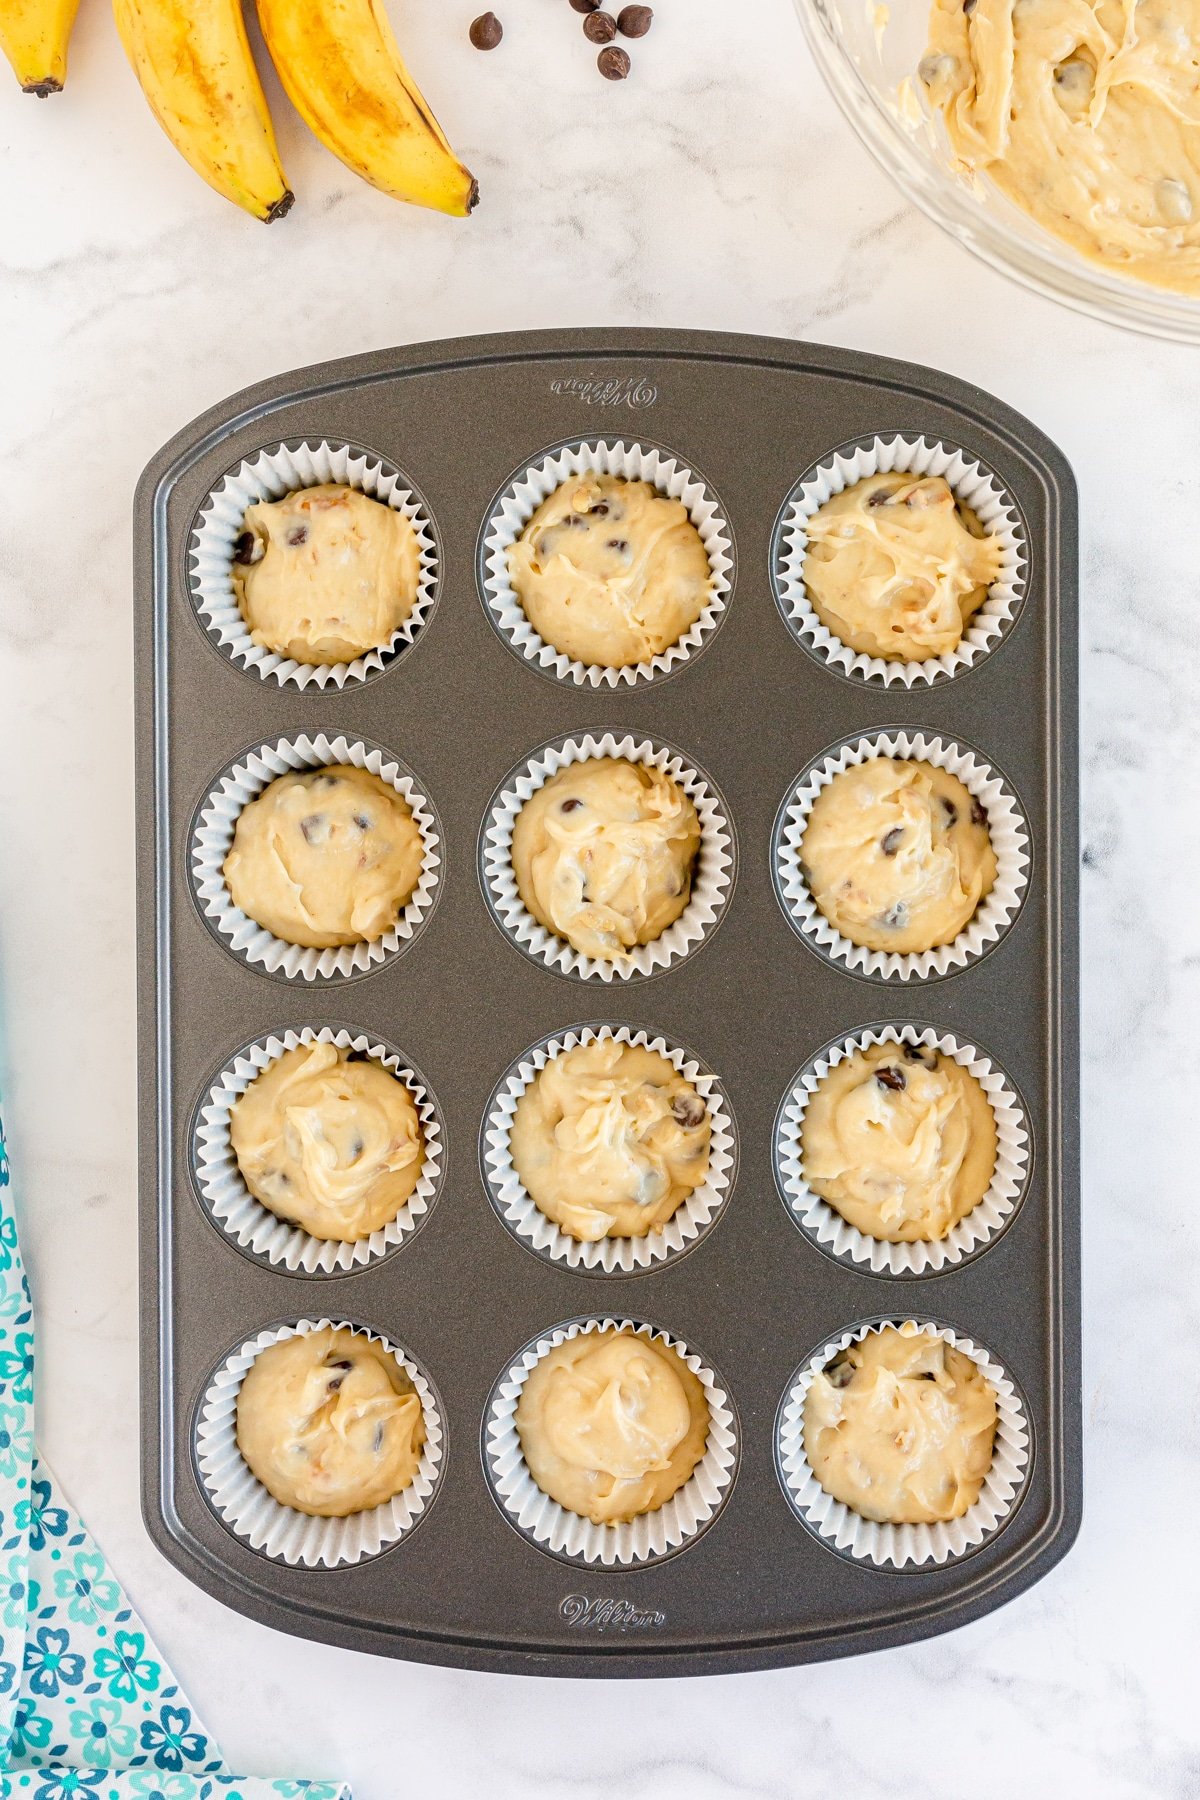 unbaked banana chocolate chip muffins in a muffin tin